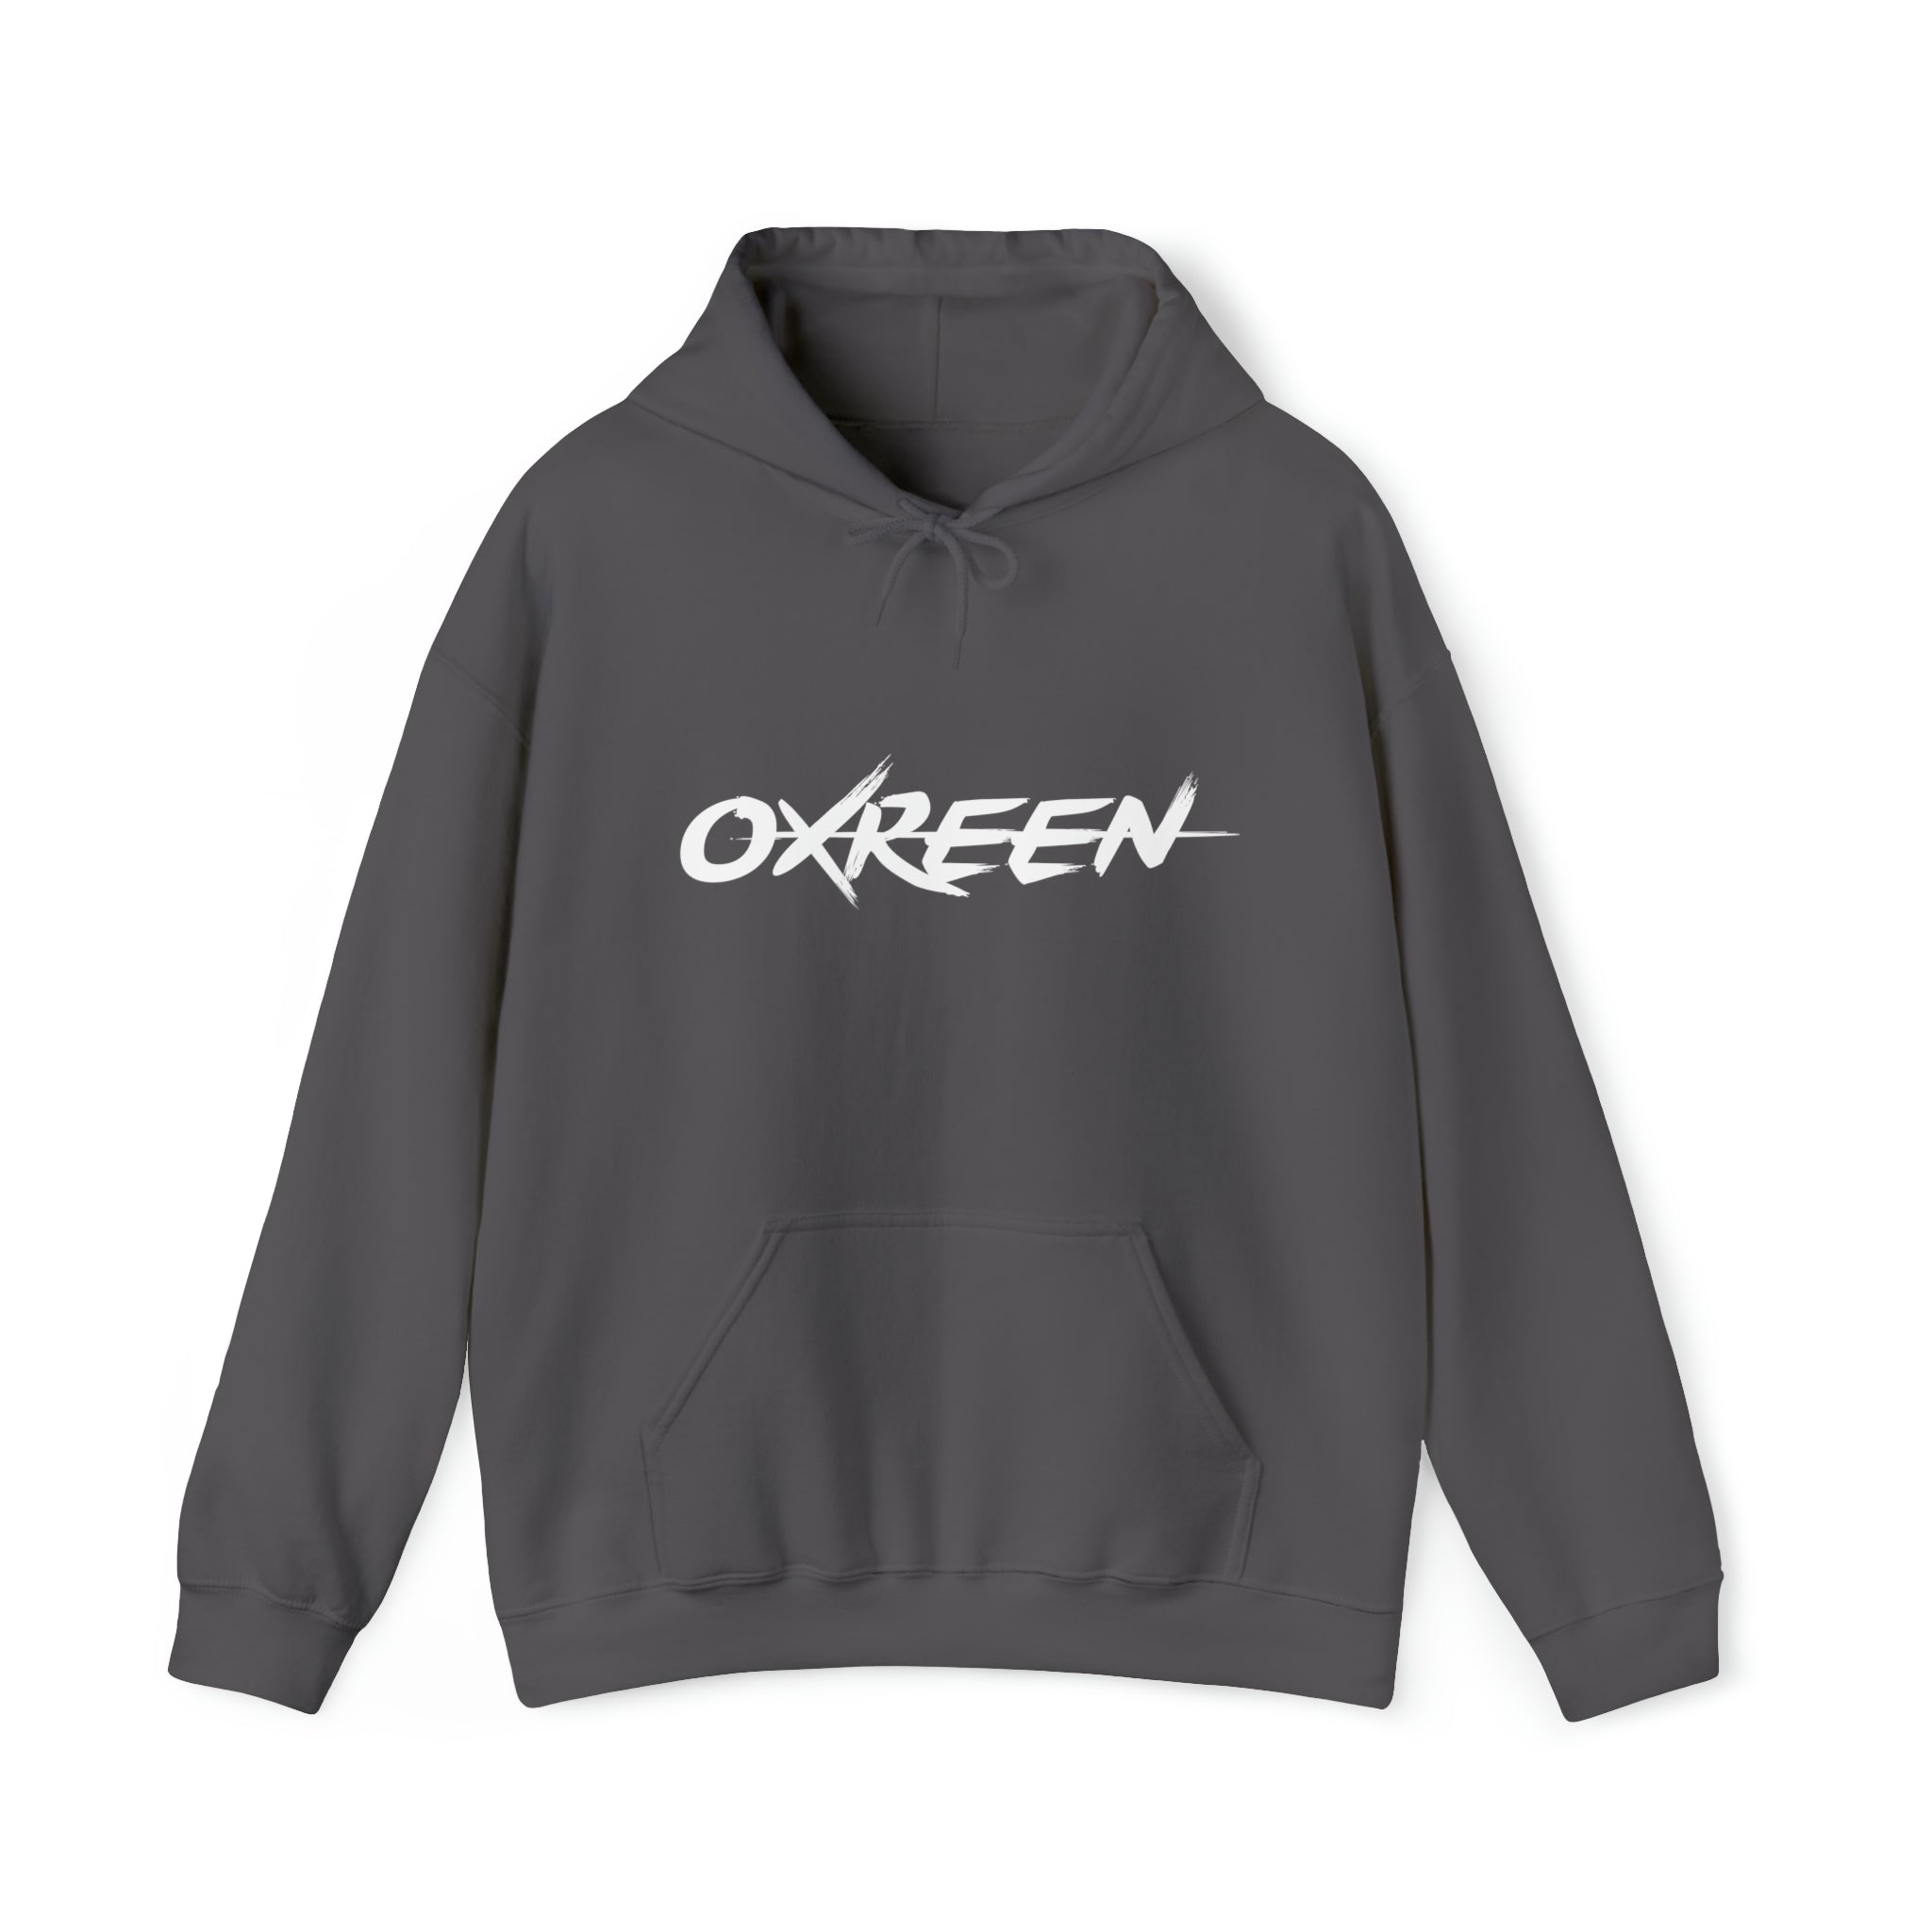 Oxreen Hoodie